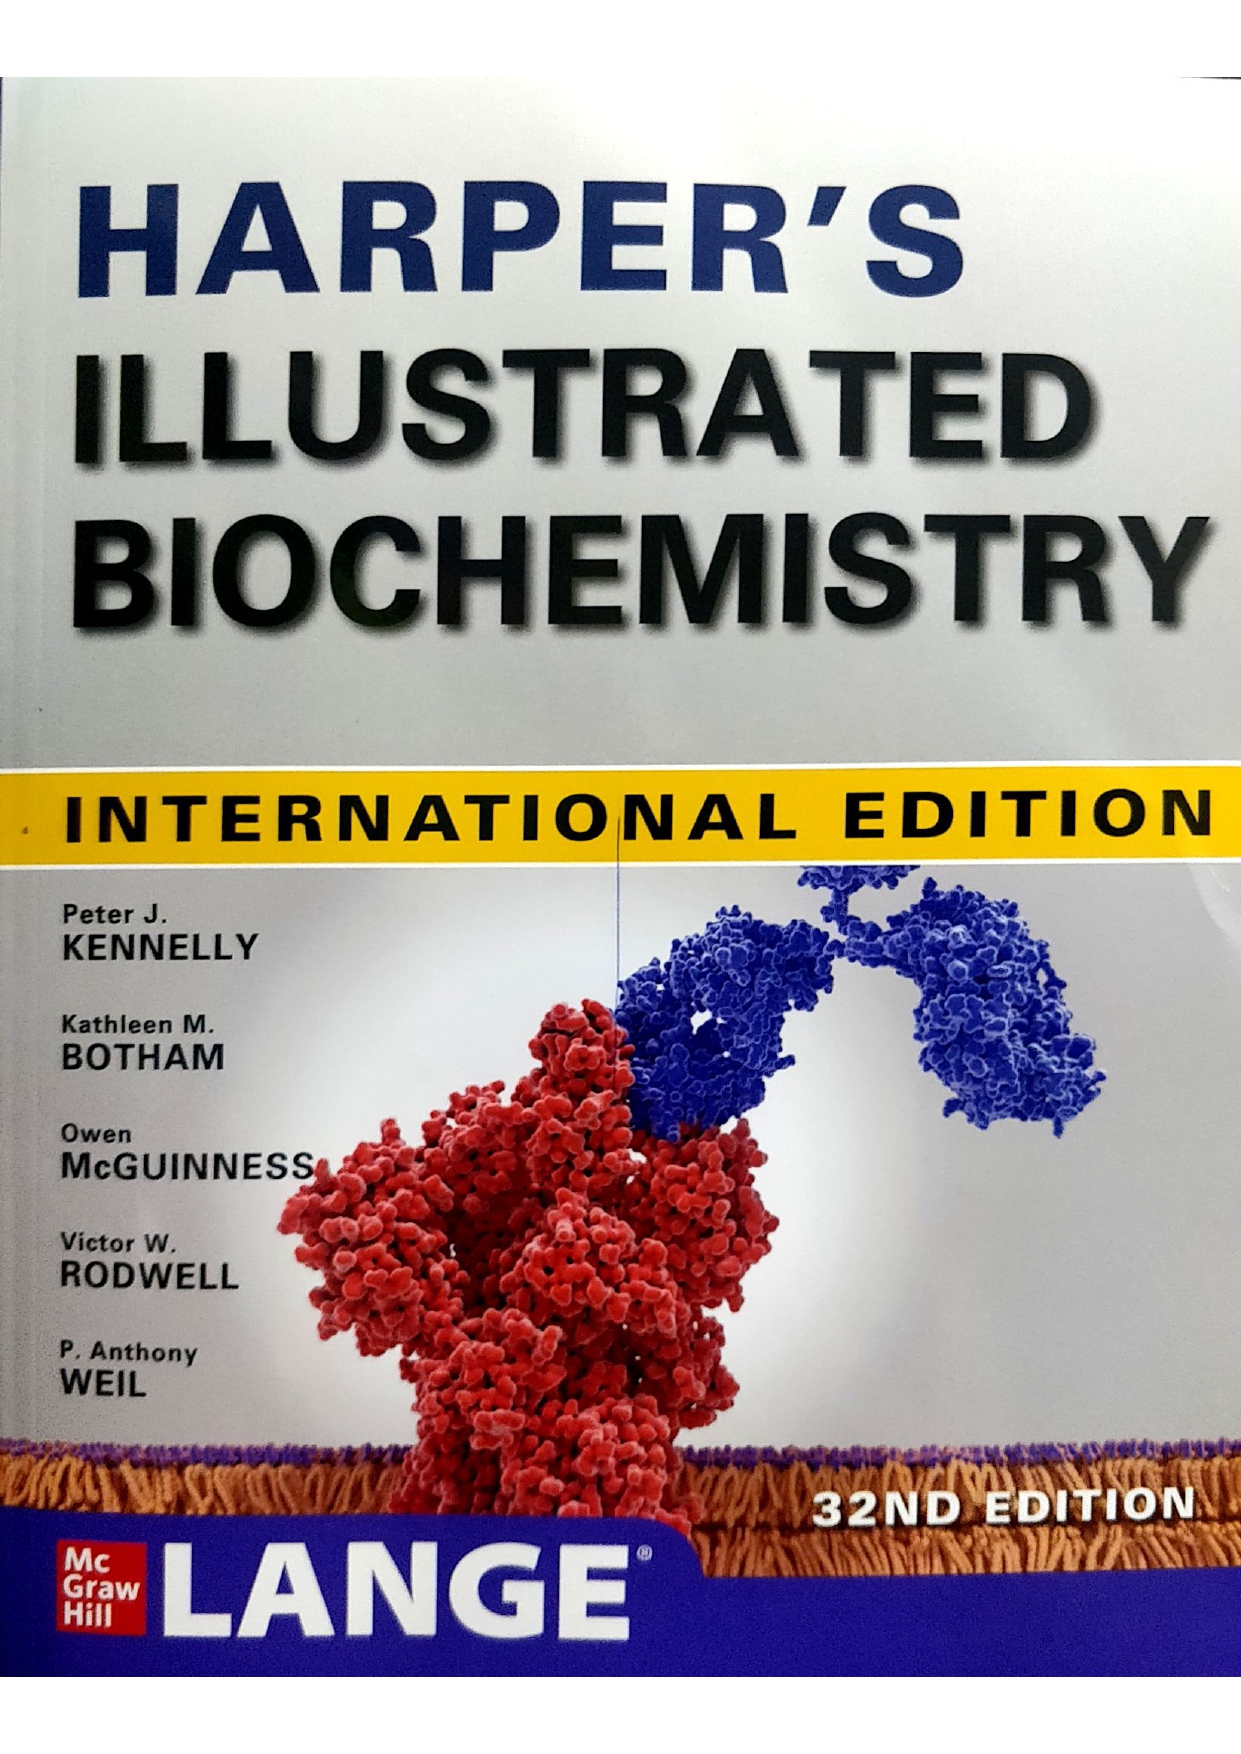 Harpers Illustrated Biochemistry 32nd IE edition